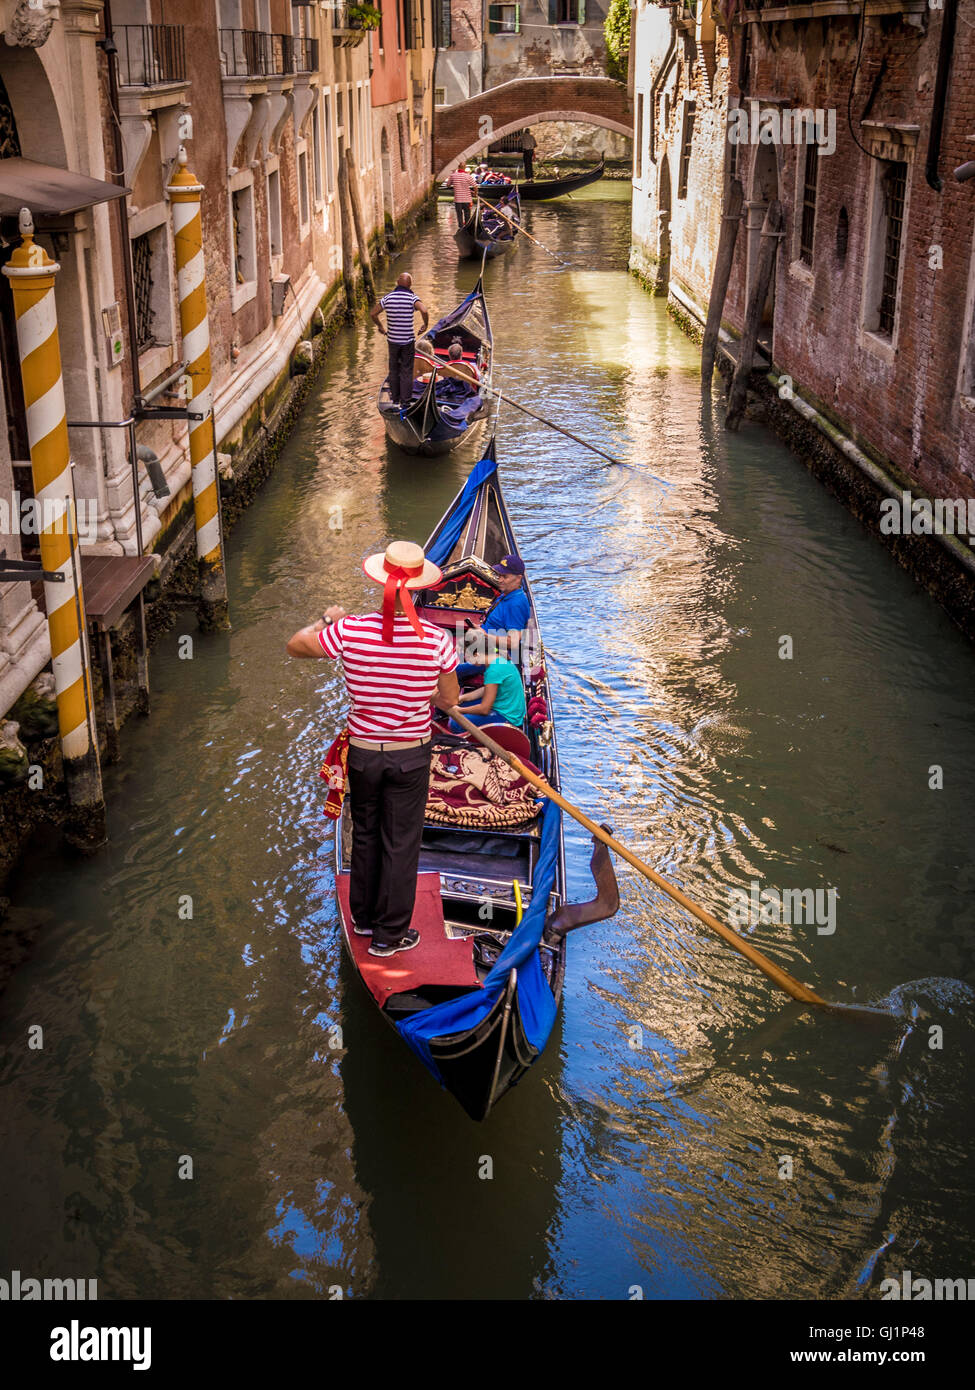 Gondolier wearing traditional striped top and boater hat steering his gondola along a narrow canal in Venice, Italy. Stock Photo